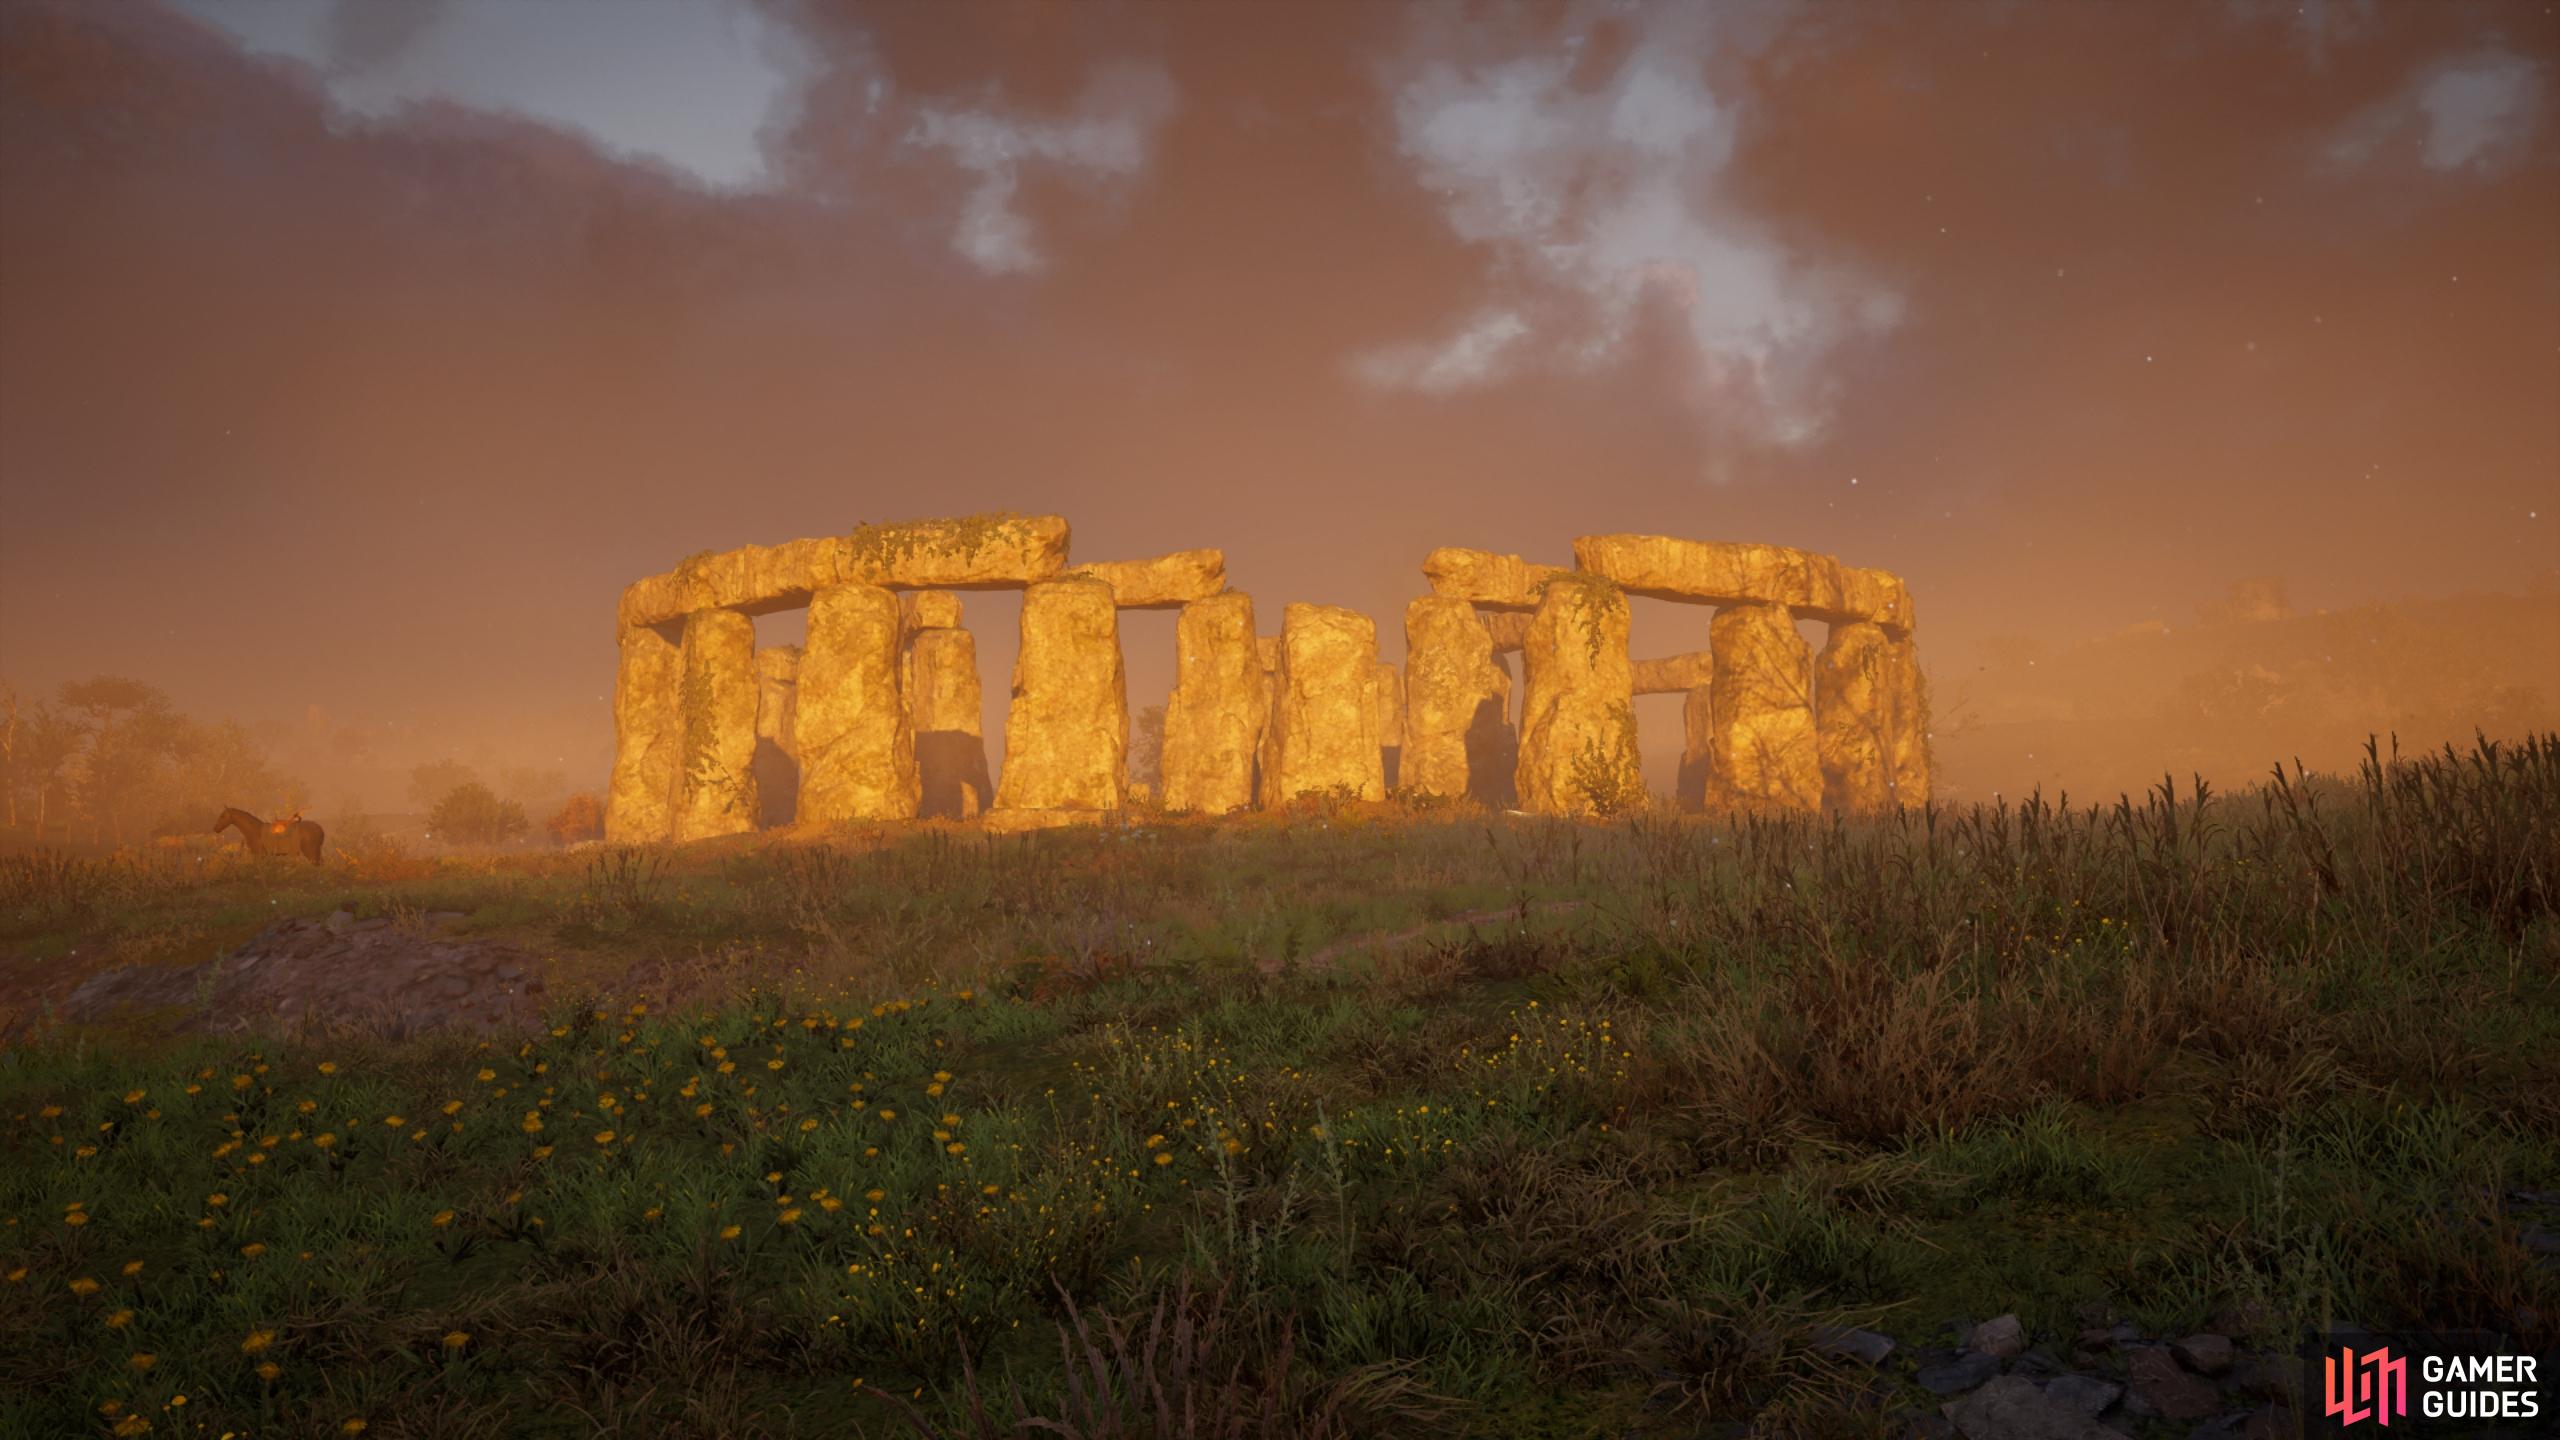 Megalith monuments like the Stonehenge are found across Ireland, so we'll likely see some more of those in the new expansion.